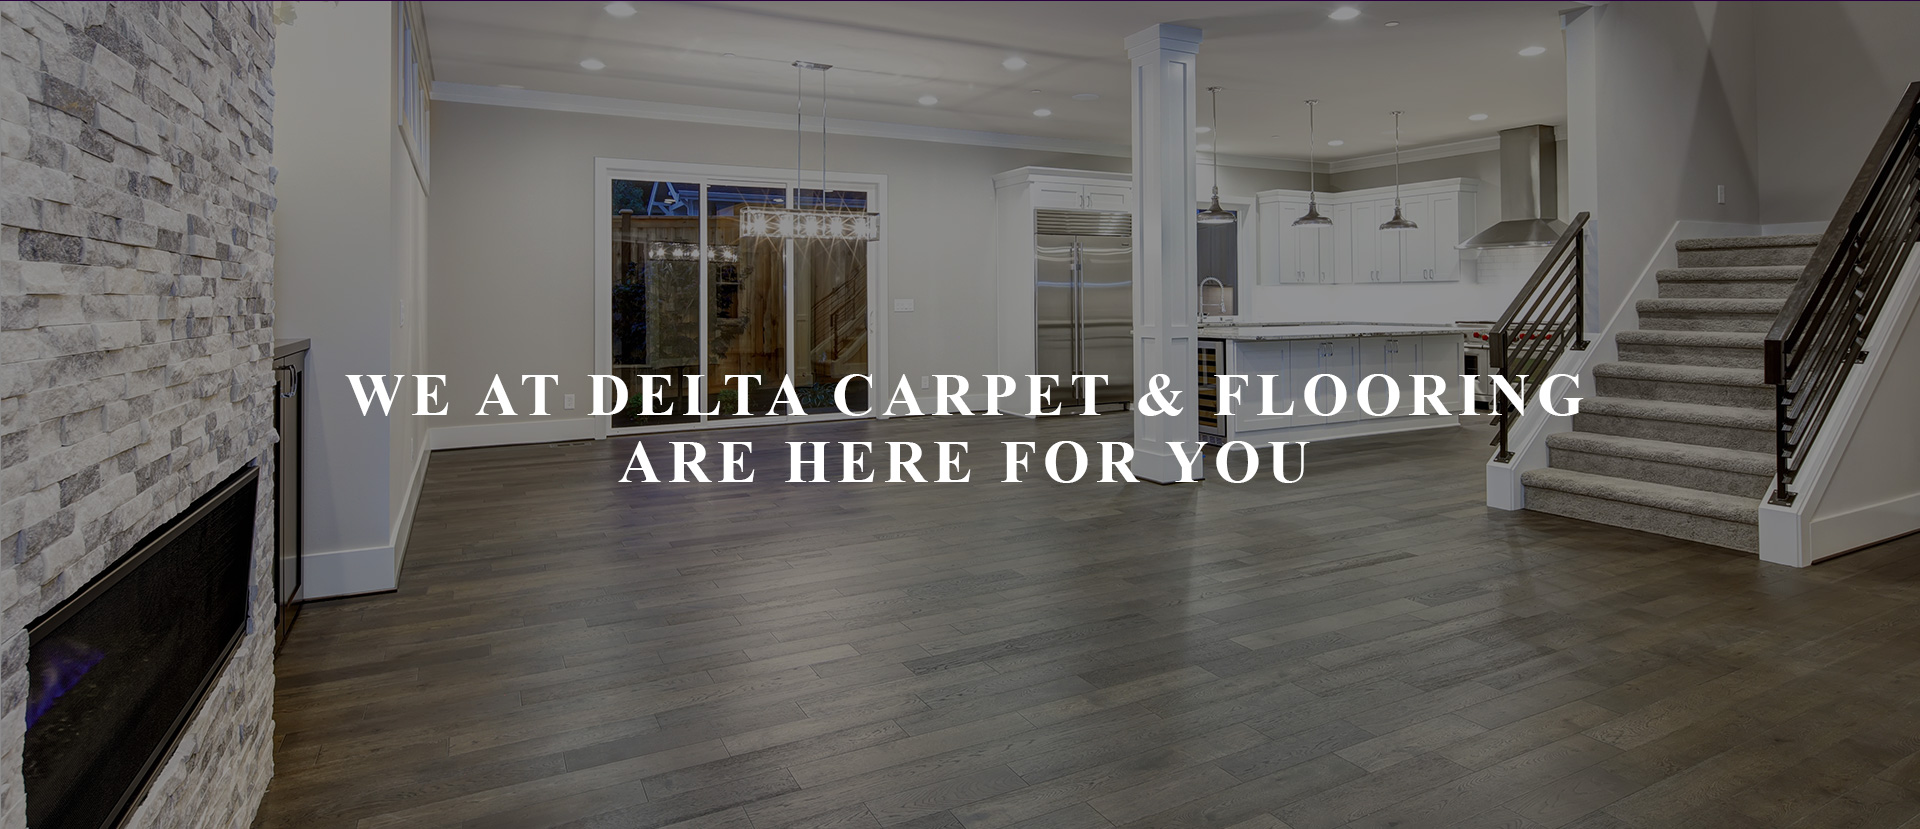 We at Delta Carpet & Flooring Are Here for You